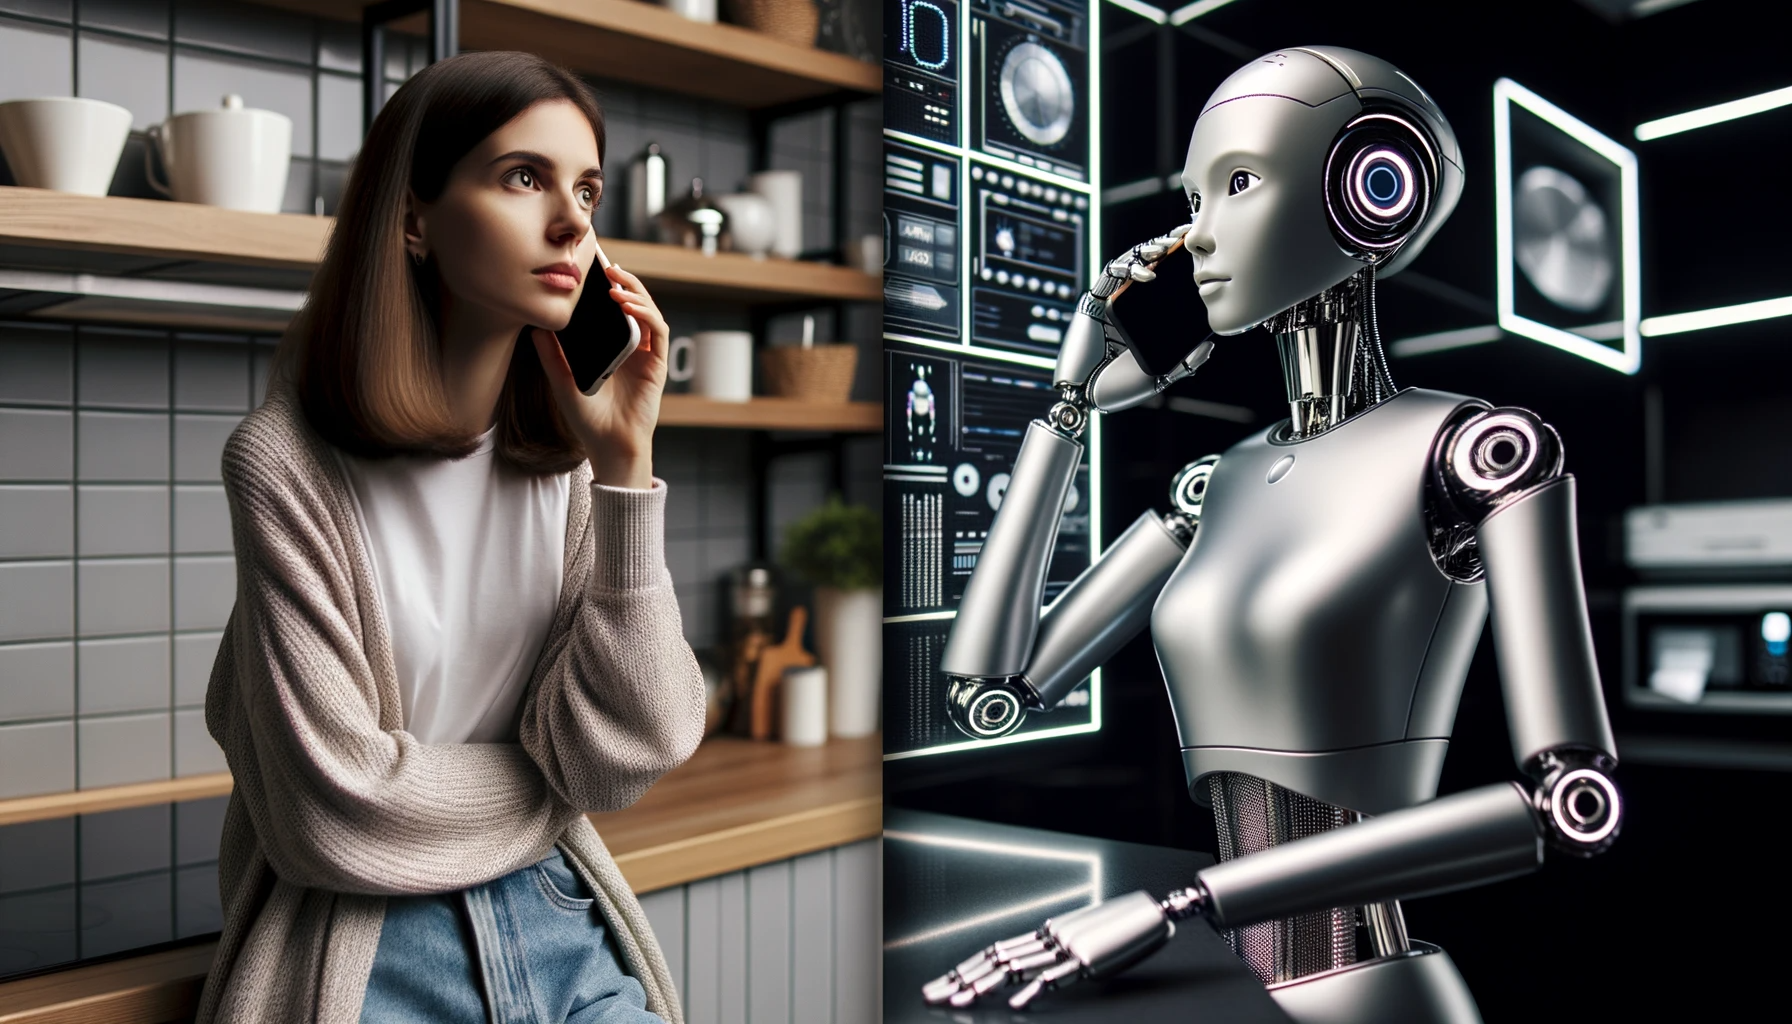 ChatGPT and other AI platforms along with Text-To-Speech programs can handle customer service calls better than most humans using billions of data points to get better with every call.